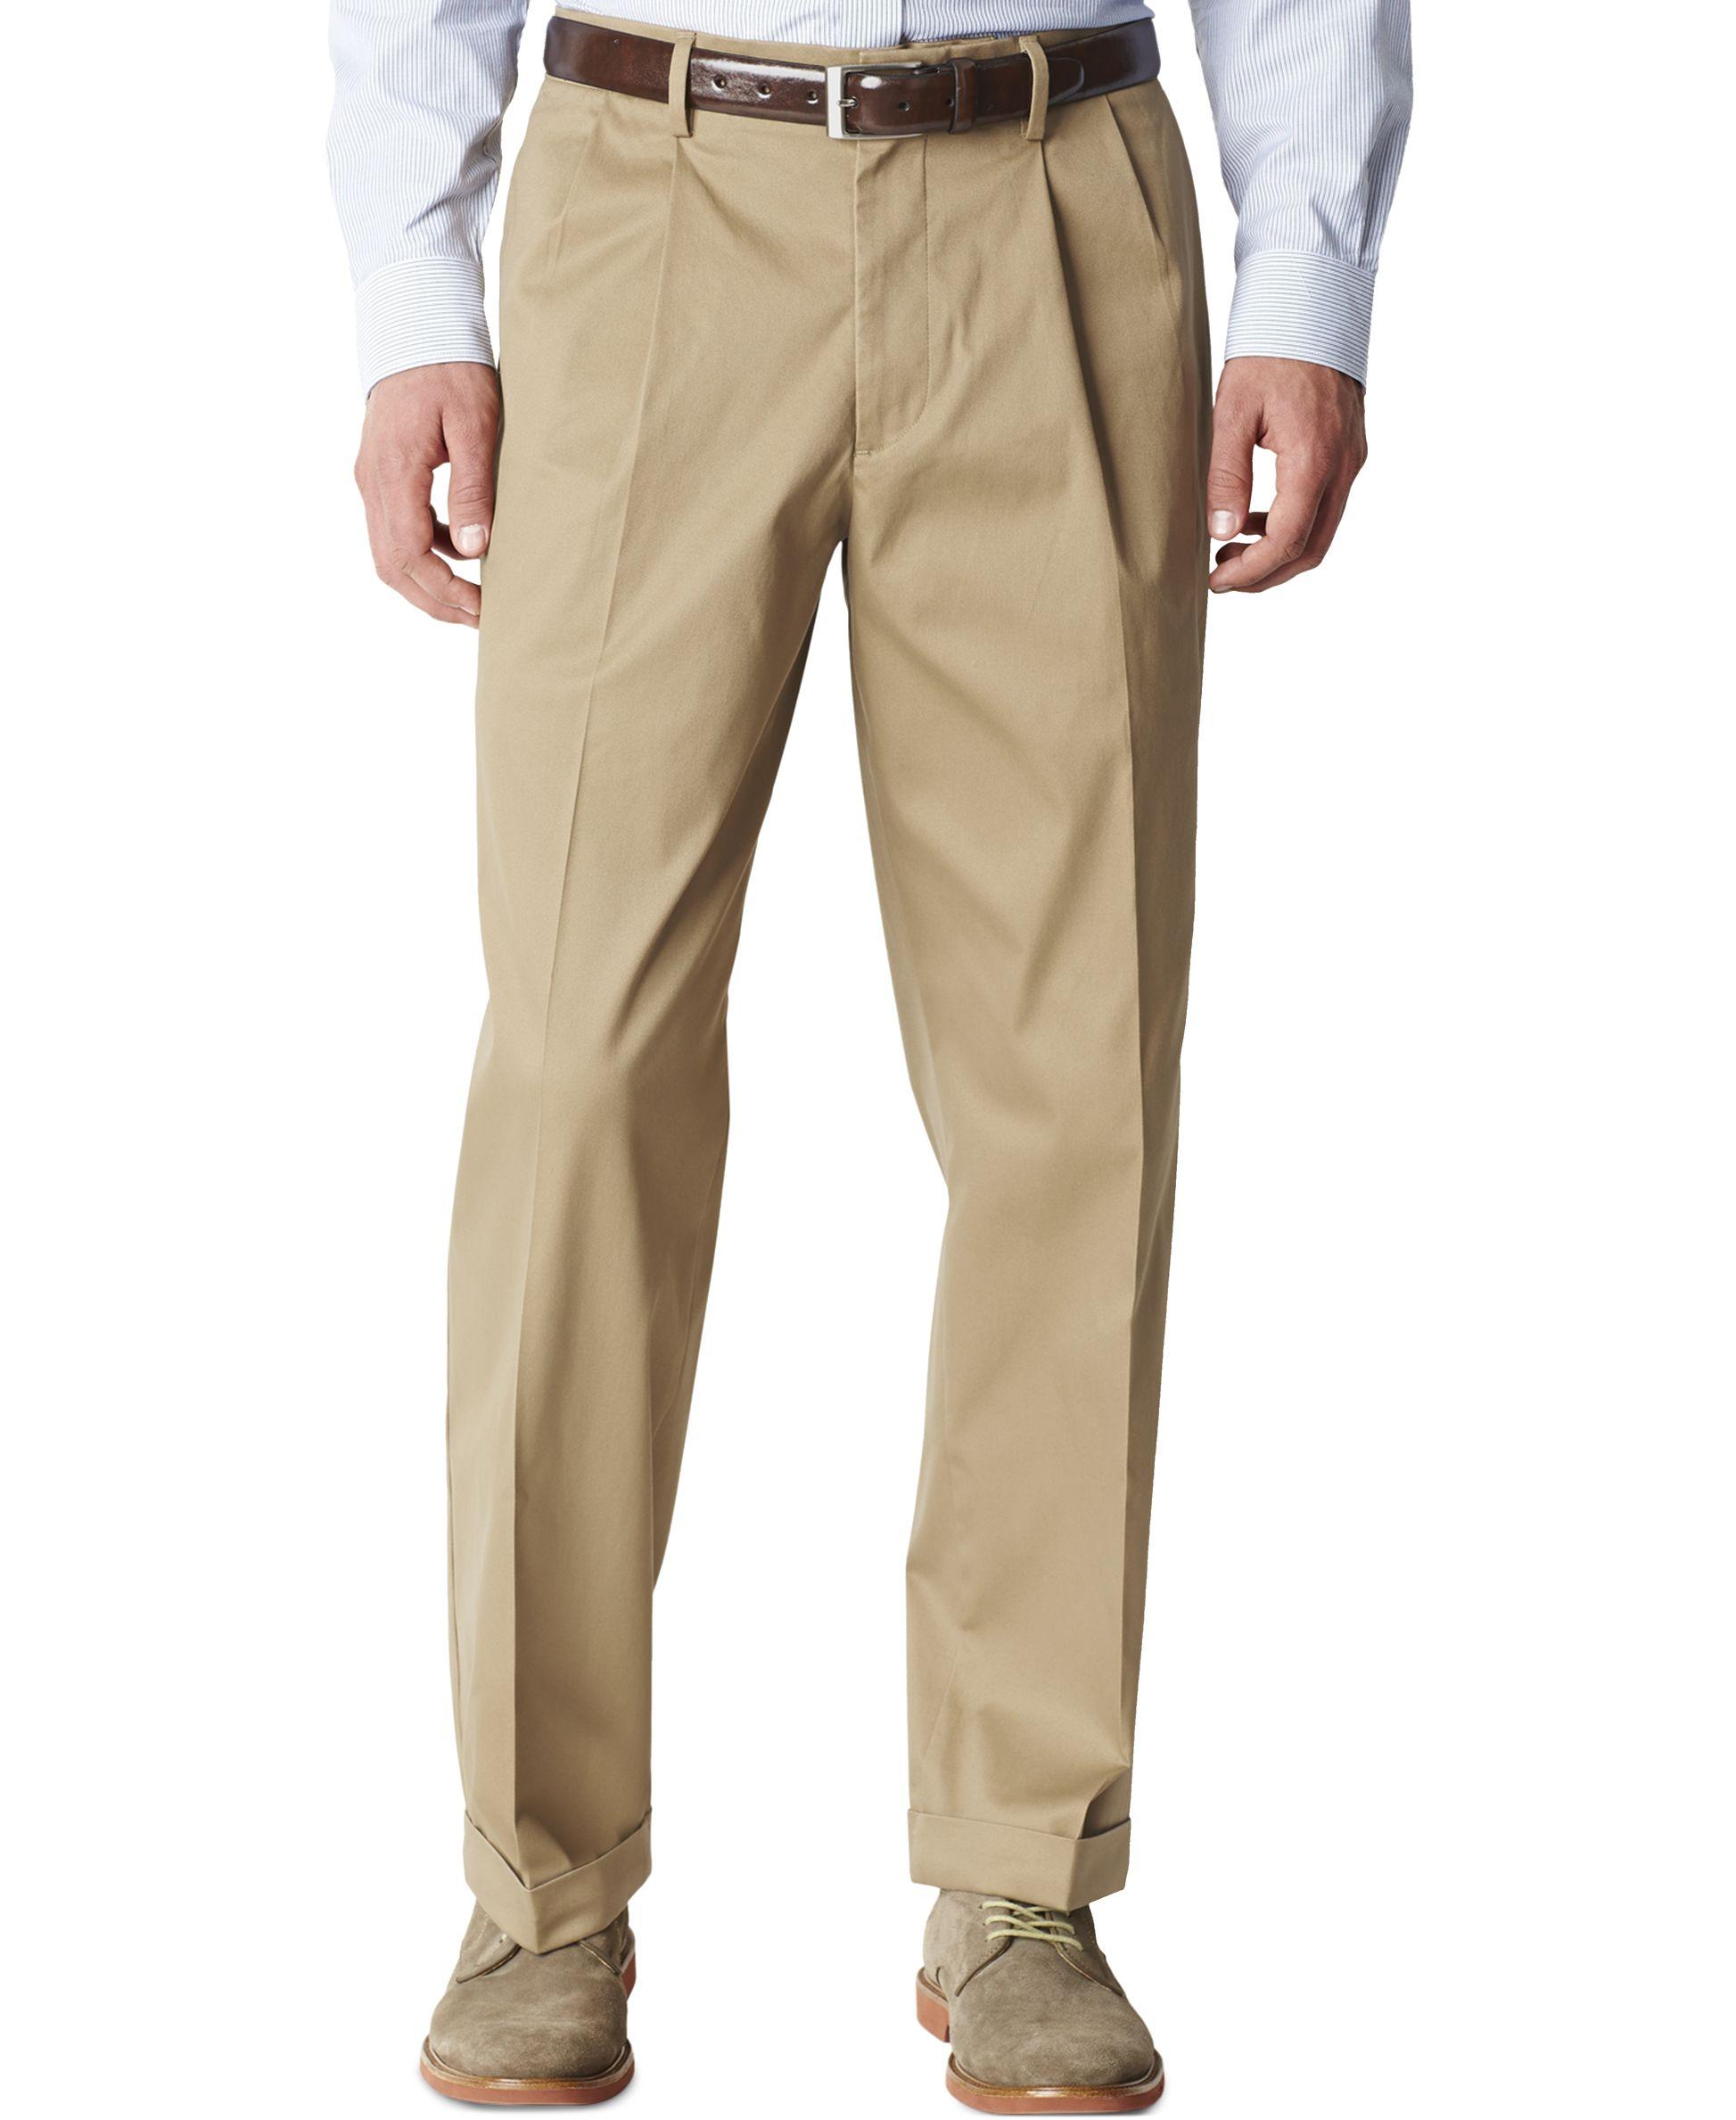 Dockers Relaxed Fit Iron Free Khaki Pants - Pleated D4 in Natural for ...